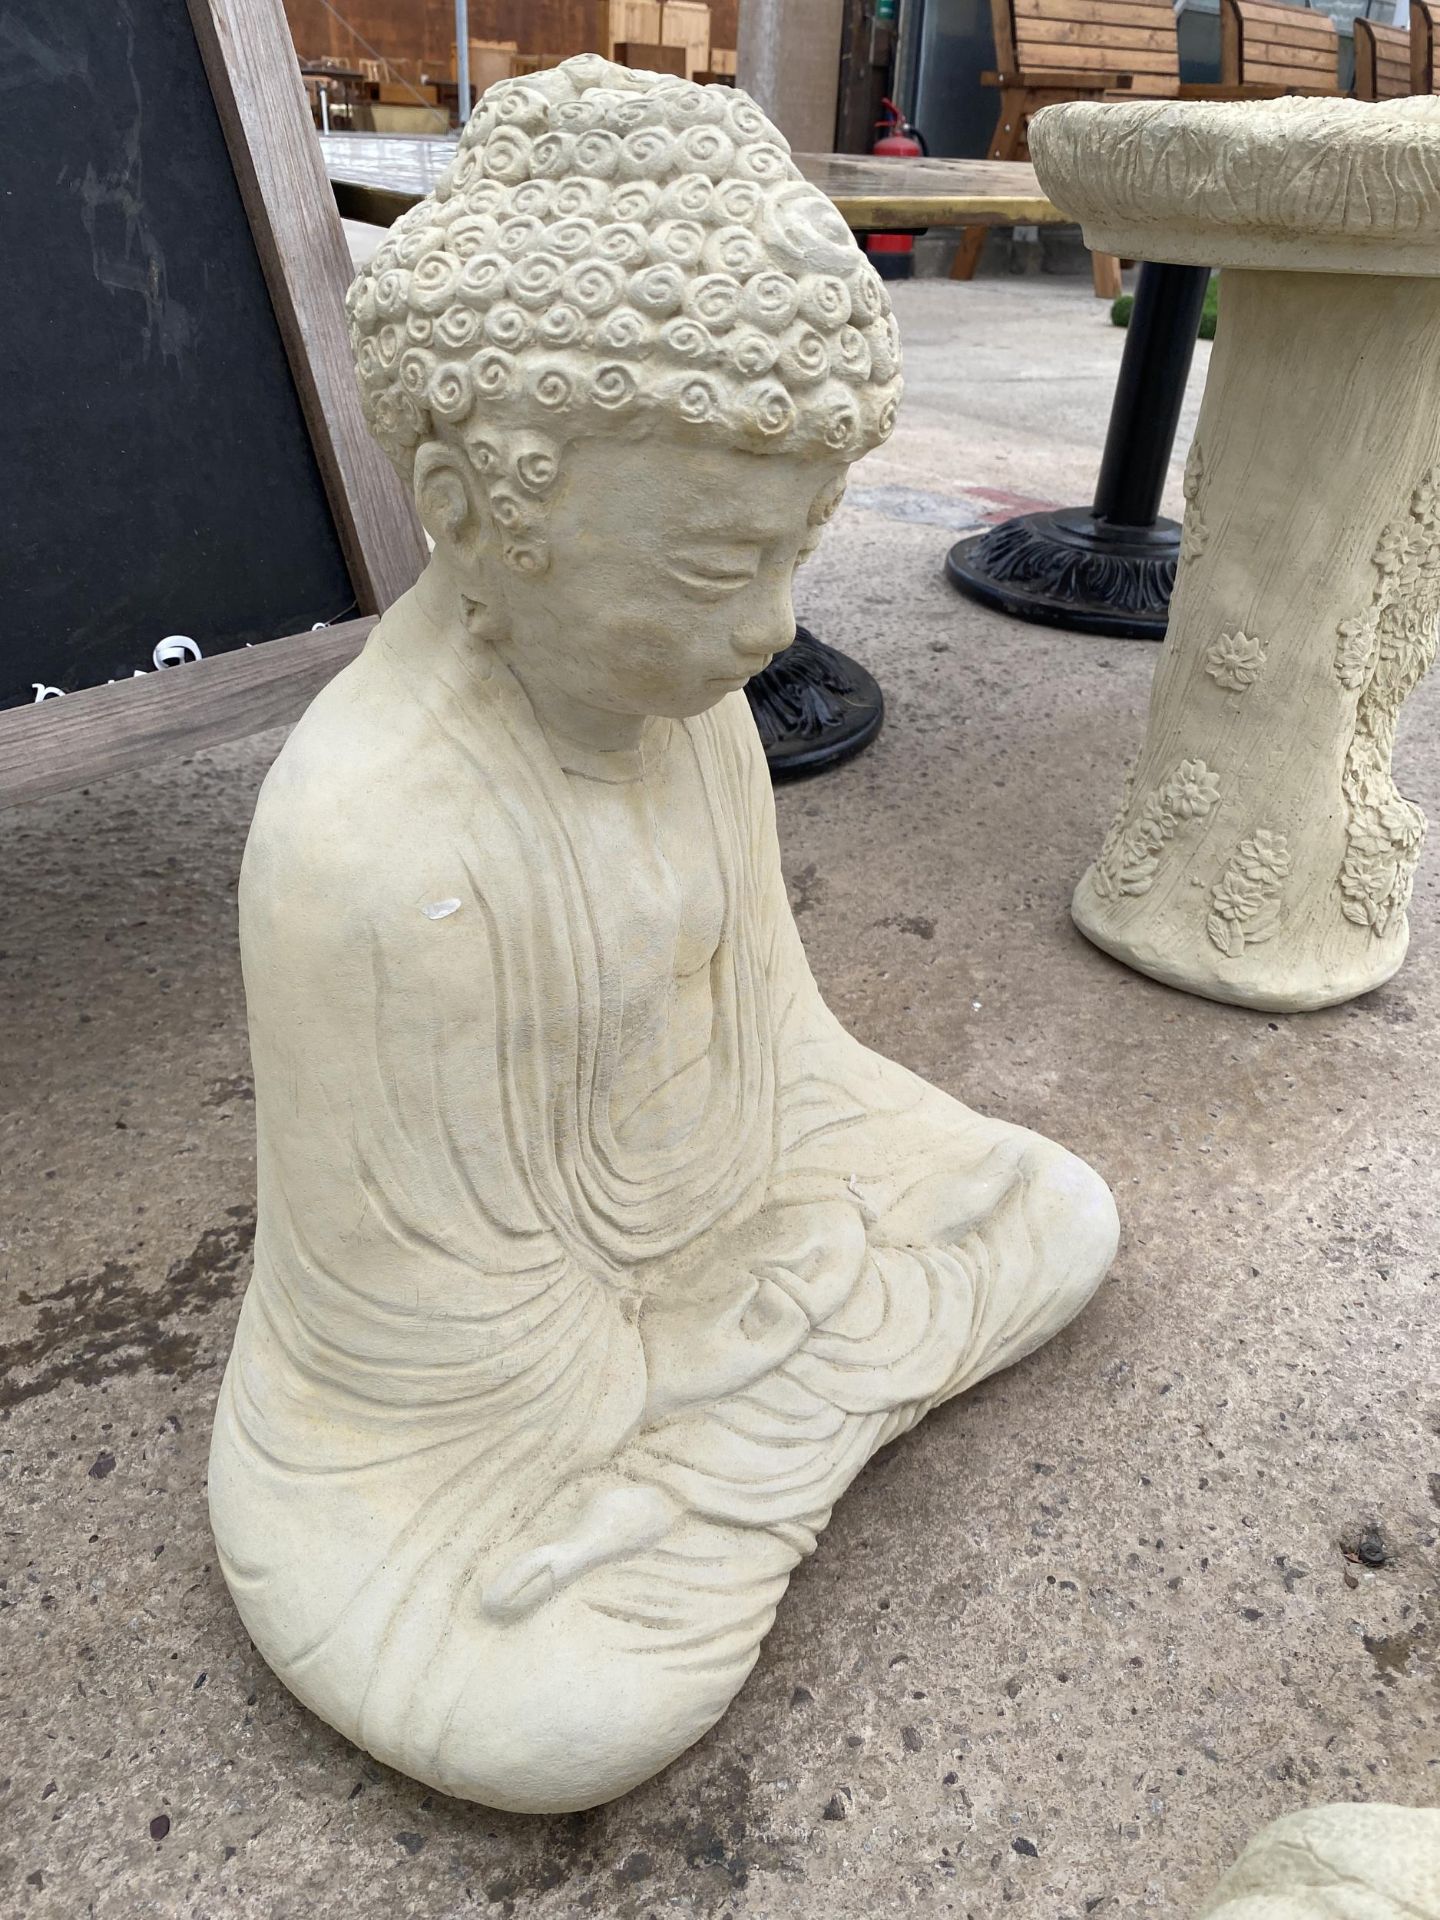 AN AS NEW EX DISPLAY CONCRETE BUDDAH FIGURE *PLEASE NOTE VAT TO BE PAID ON THIS ITEM* - Image 2 of 4